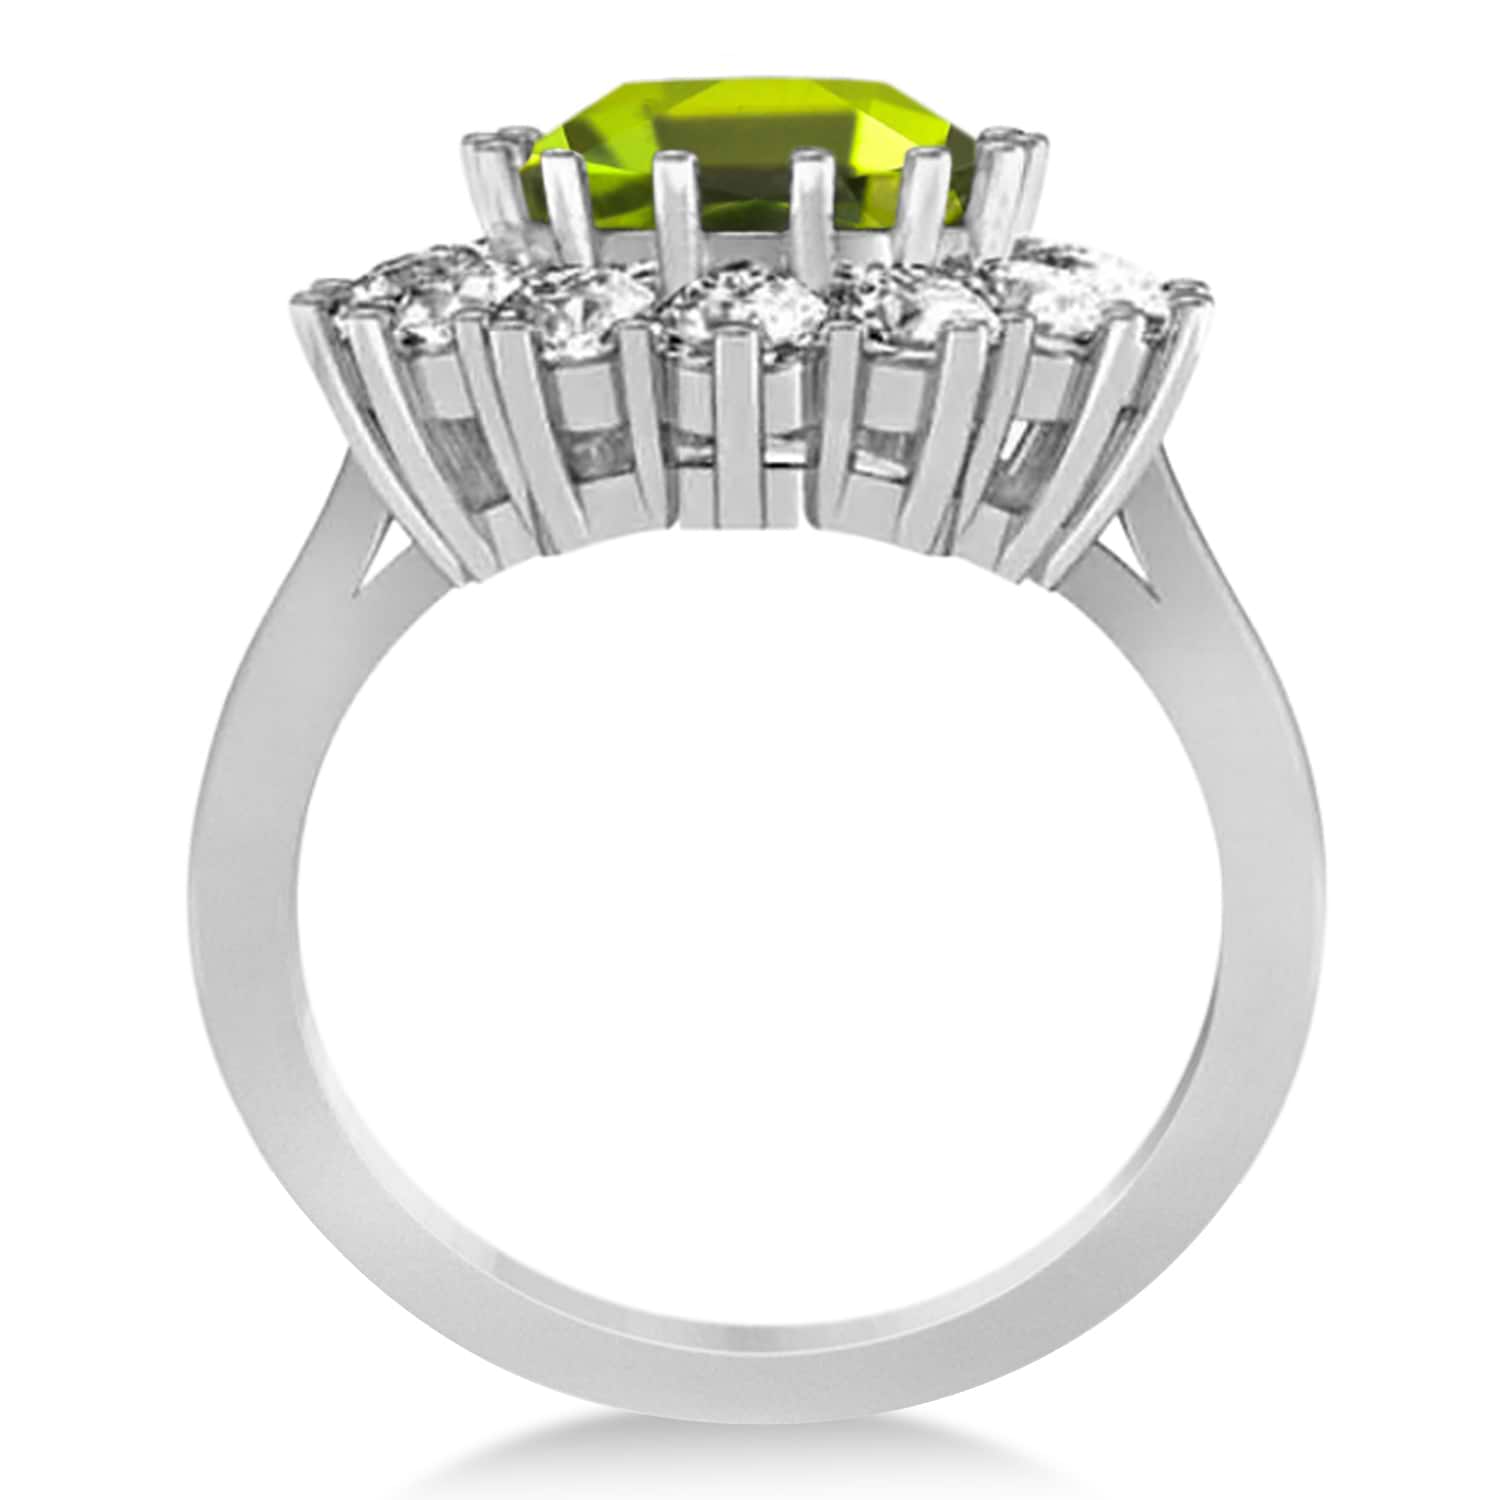 Oval Peridot & Diamond Accented Ring in 18k White Gold (5.40ctw)